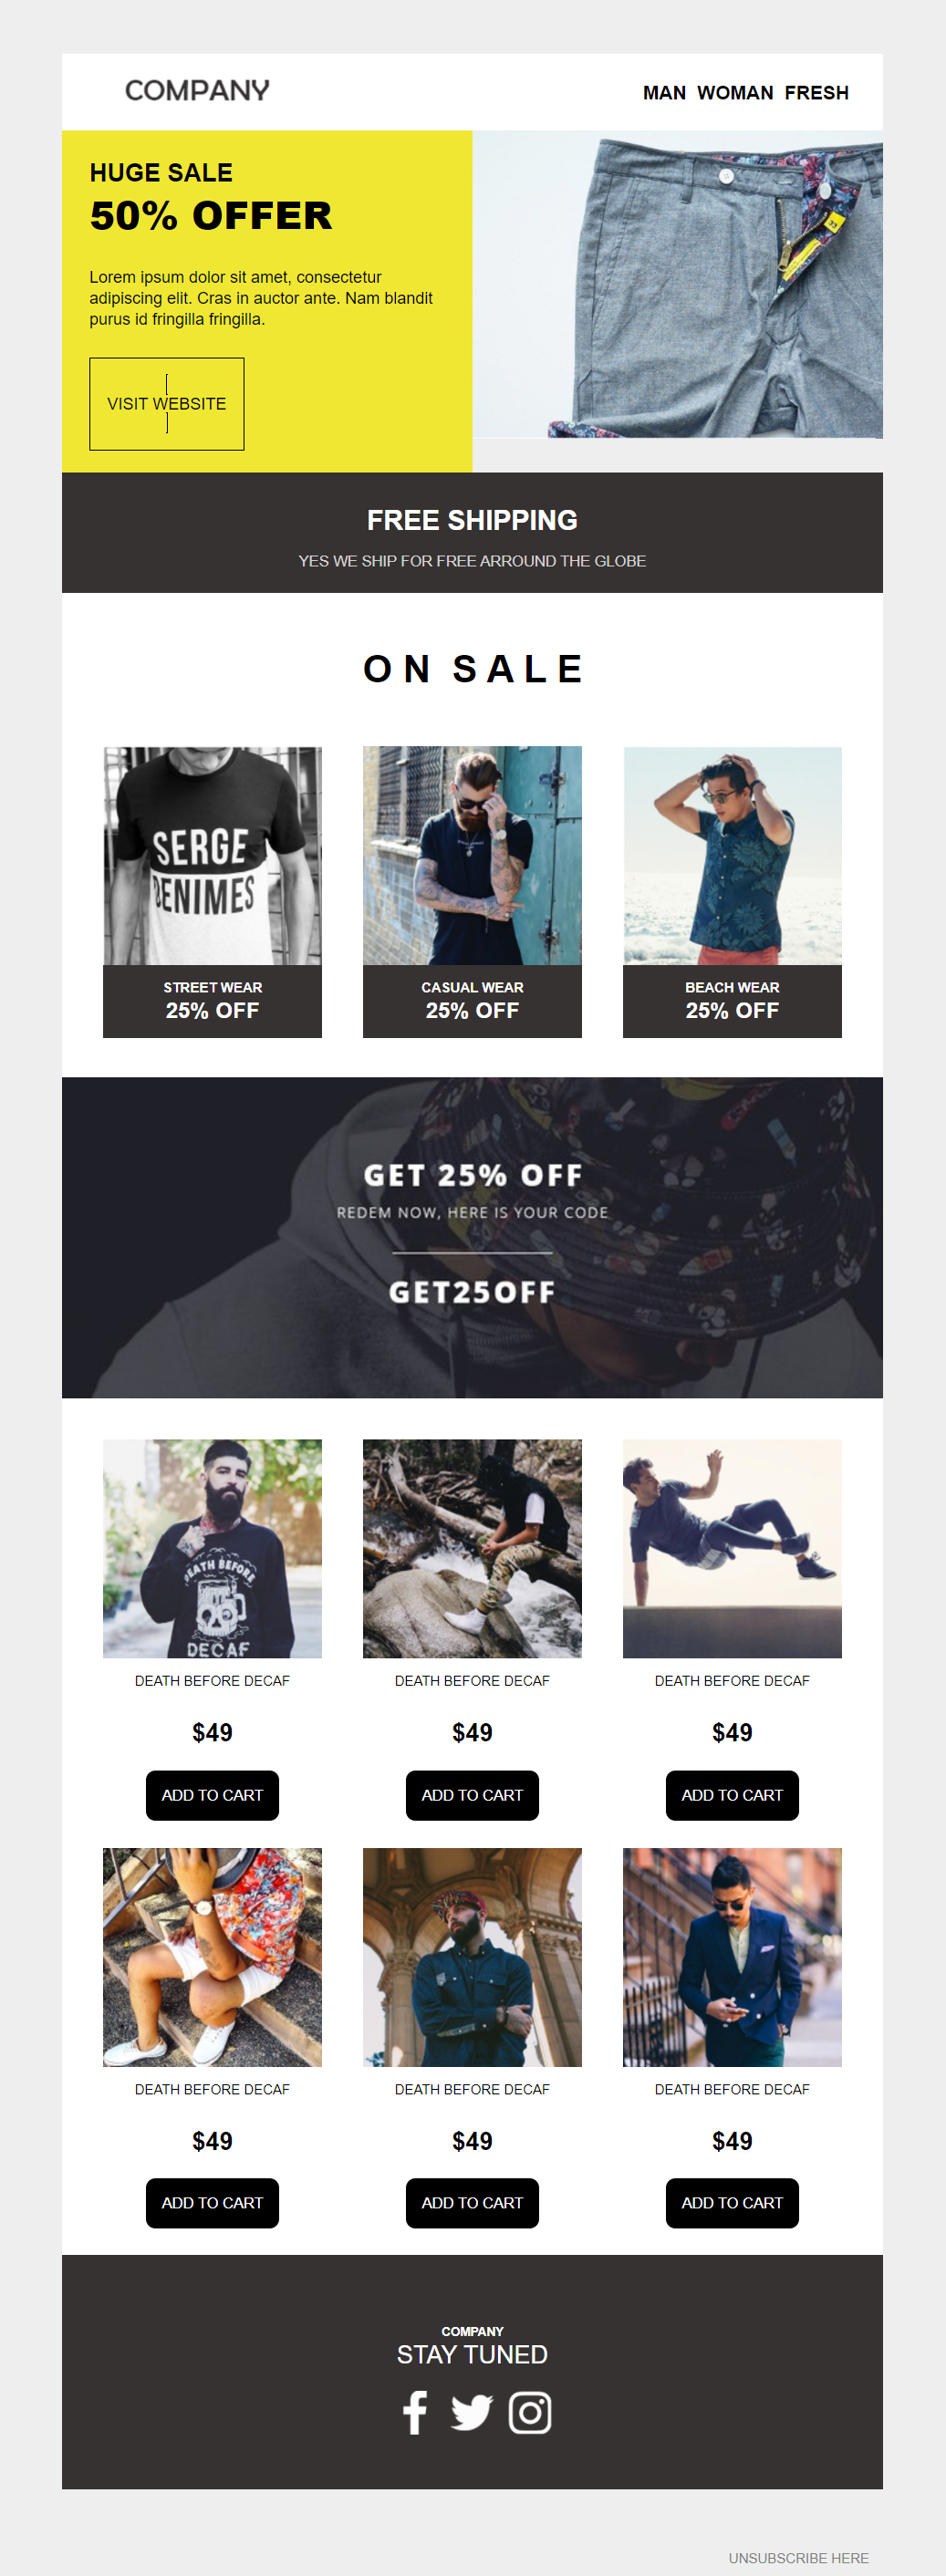 ecommerce store email design for offers